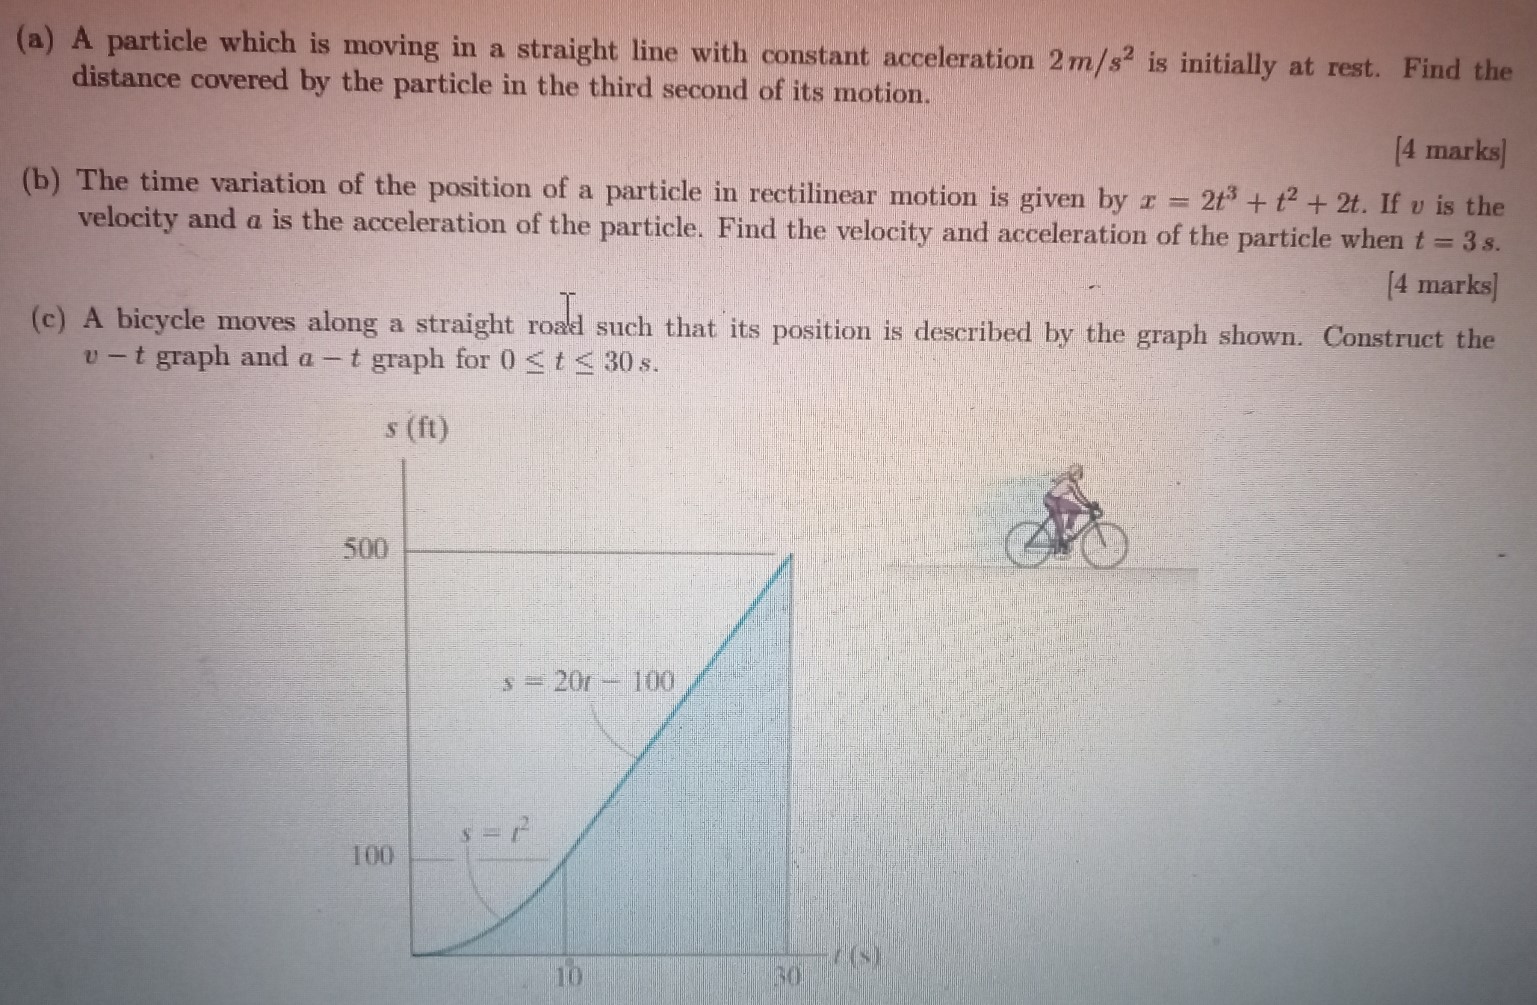 (a) A particle which is moving in a straight line with constant acceleration 2 m/s2 is initially at rest. Find the distance covered by the particle in the third second of its motion. [4 marks] (b) The time variation of the position of a particle in rectilinear motion is given by x = 2t3 + t2 + 2t. If v is the velocity and a is the acceleration of the particle. Find the velocity and acceleration of the particle when t = 3 s. [4 marks] (c) A bicycle moves along a straight road such that its position is described by the graph shown. Construct the v−t graph and a−t graph for 0 ≤ t ≤ 30 s.